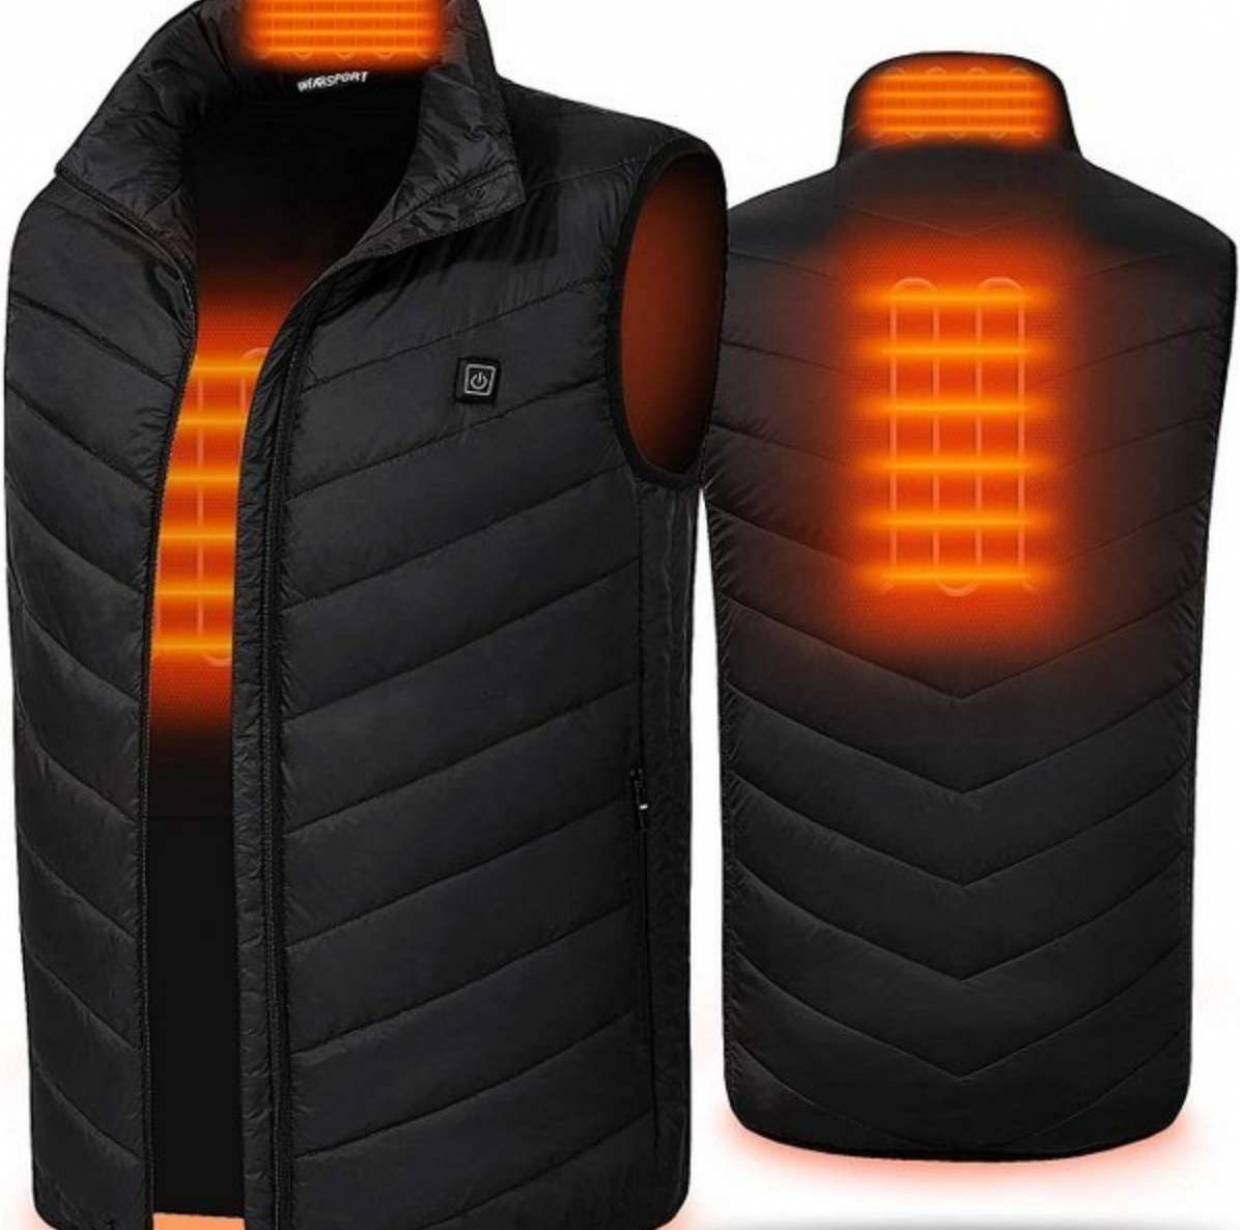 Are Heat Trapping Vests Good